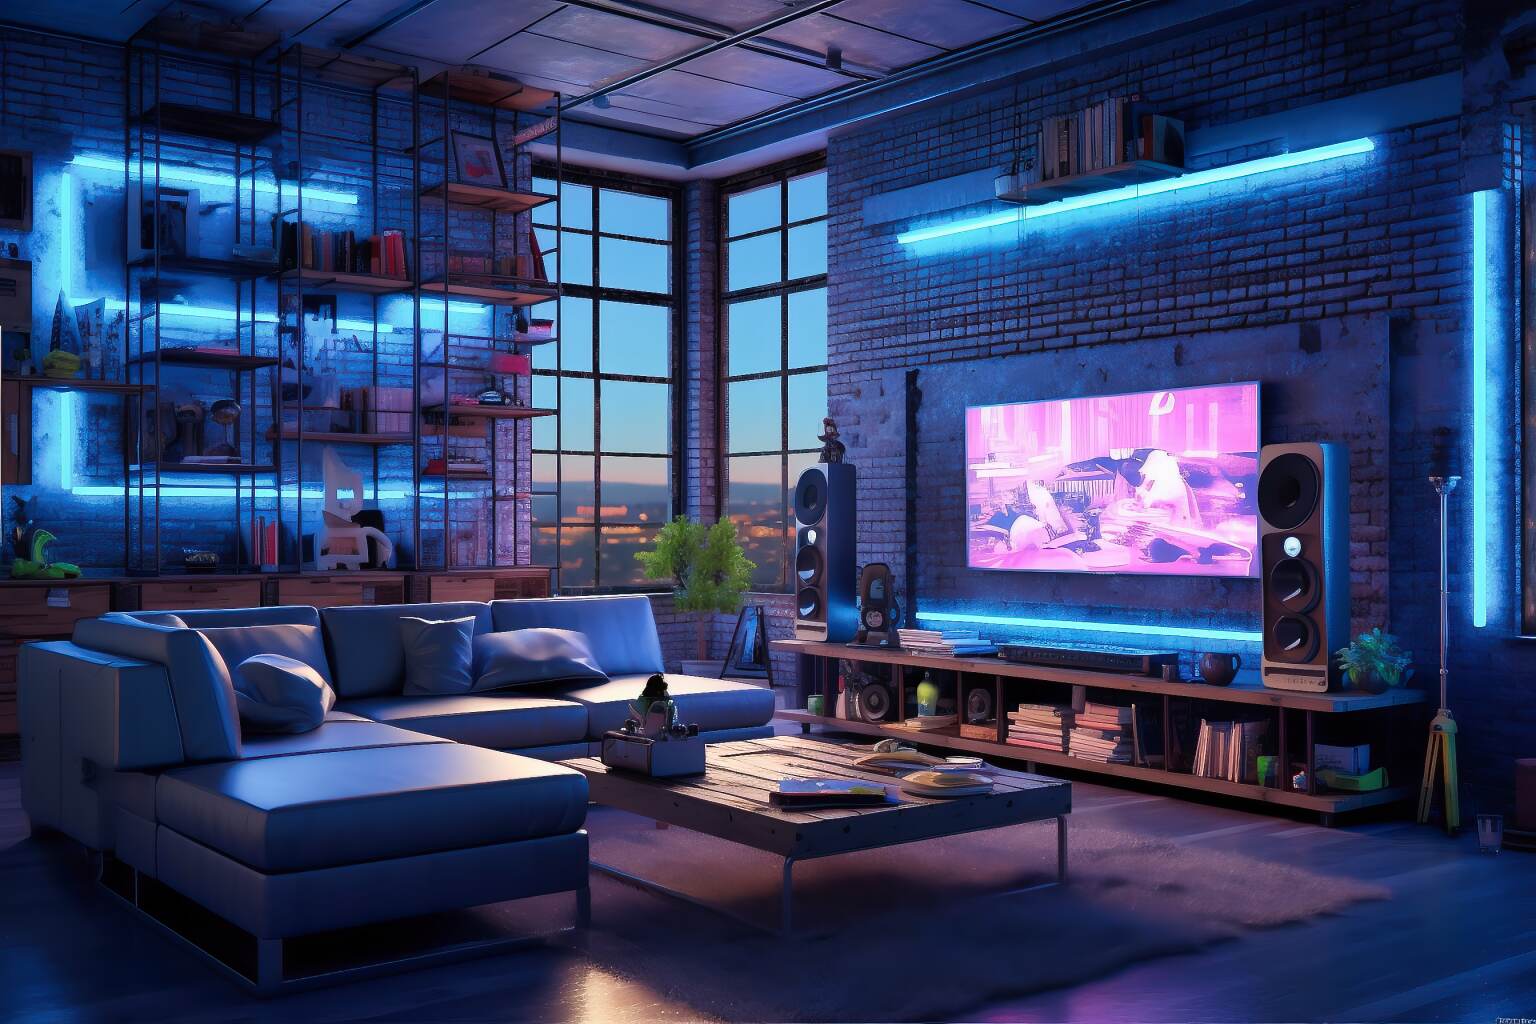 Glowing Gadget Galore In This Modern Industrial Cyber Punk Living Space